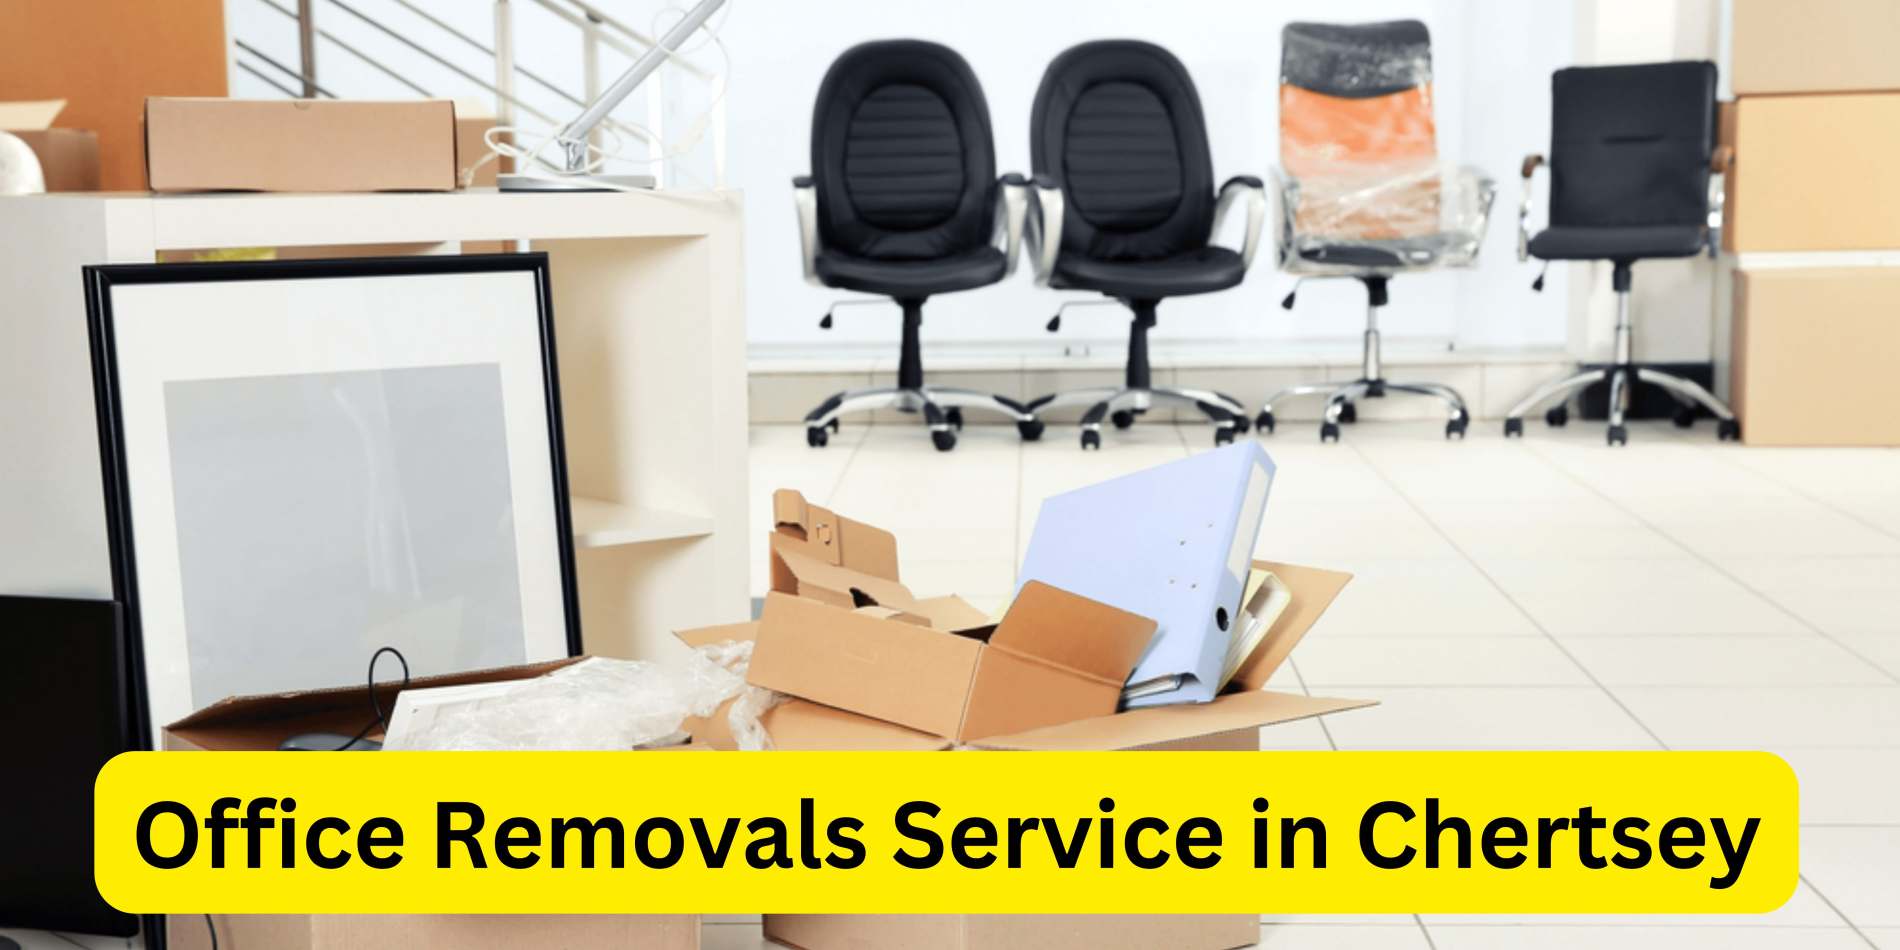 Office Removals Service in Chertsey